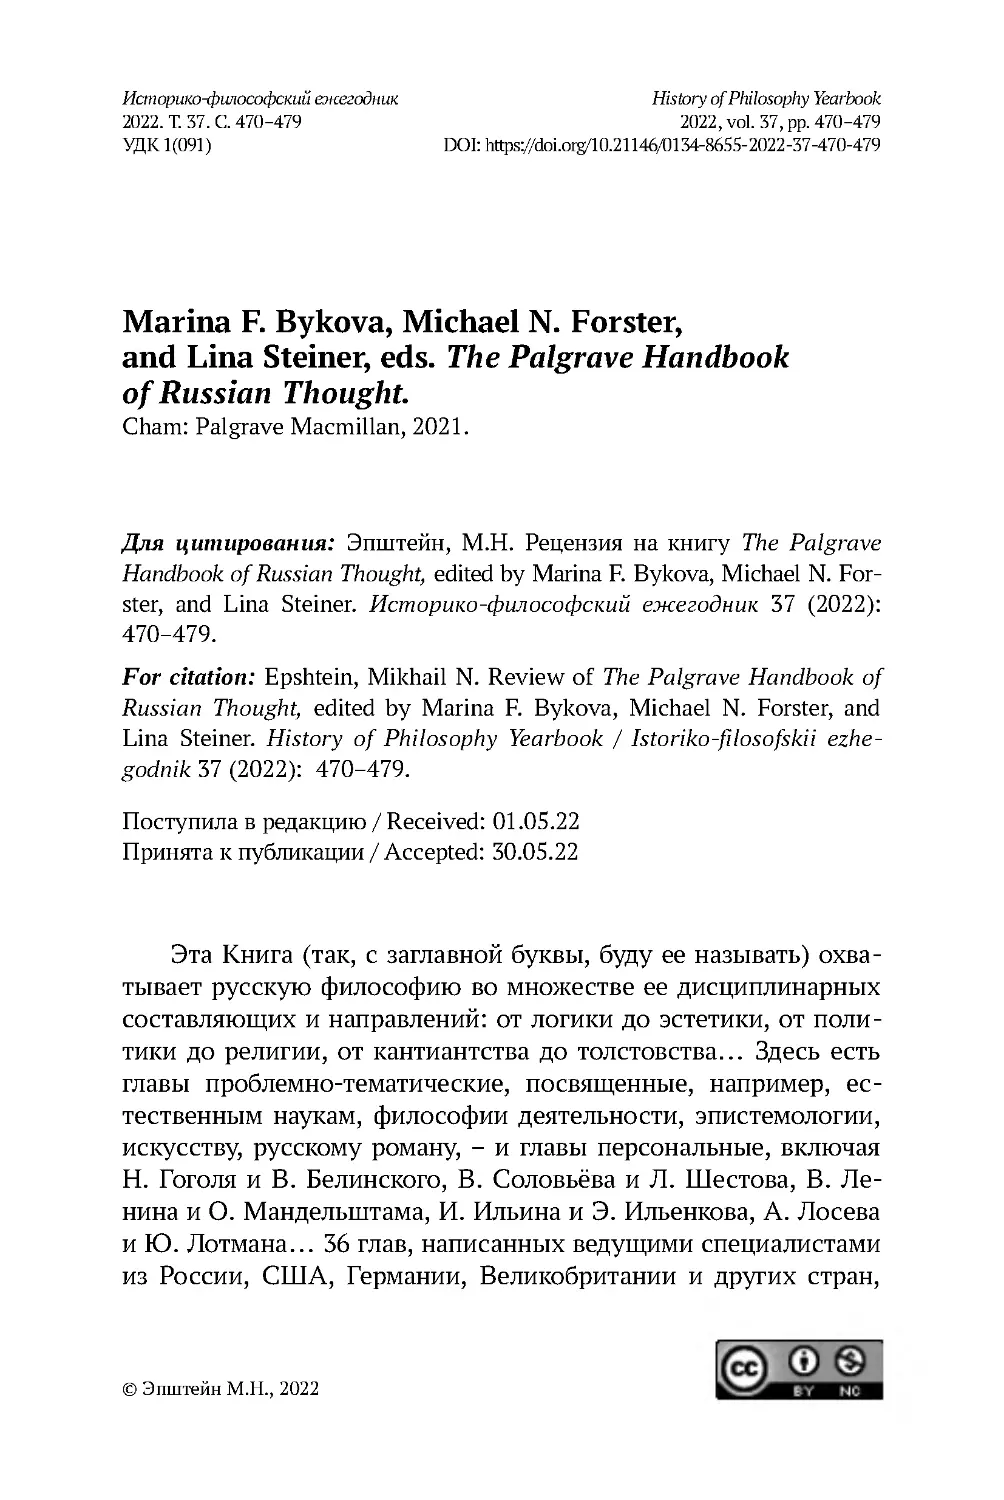 Marina F. Bykova, Michael N. Forster, and Lina Steiner, eds. The Palgrave Handbook of Russian Thought. Cham: Palgrave Macmillan, 2021.